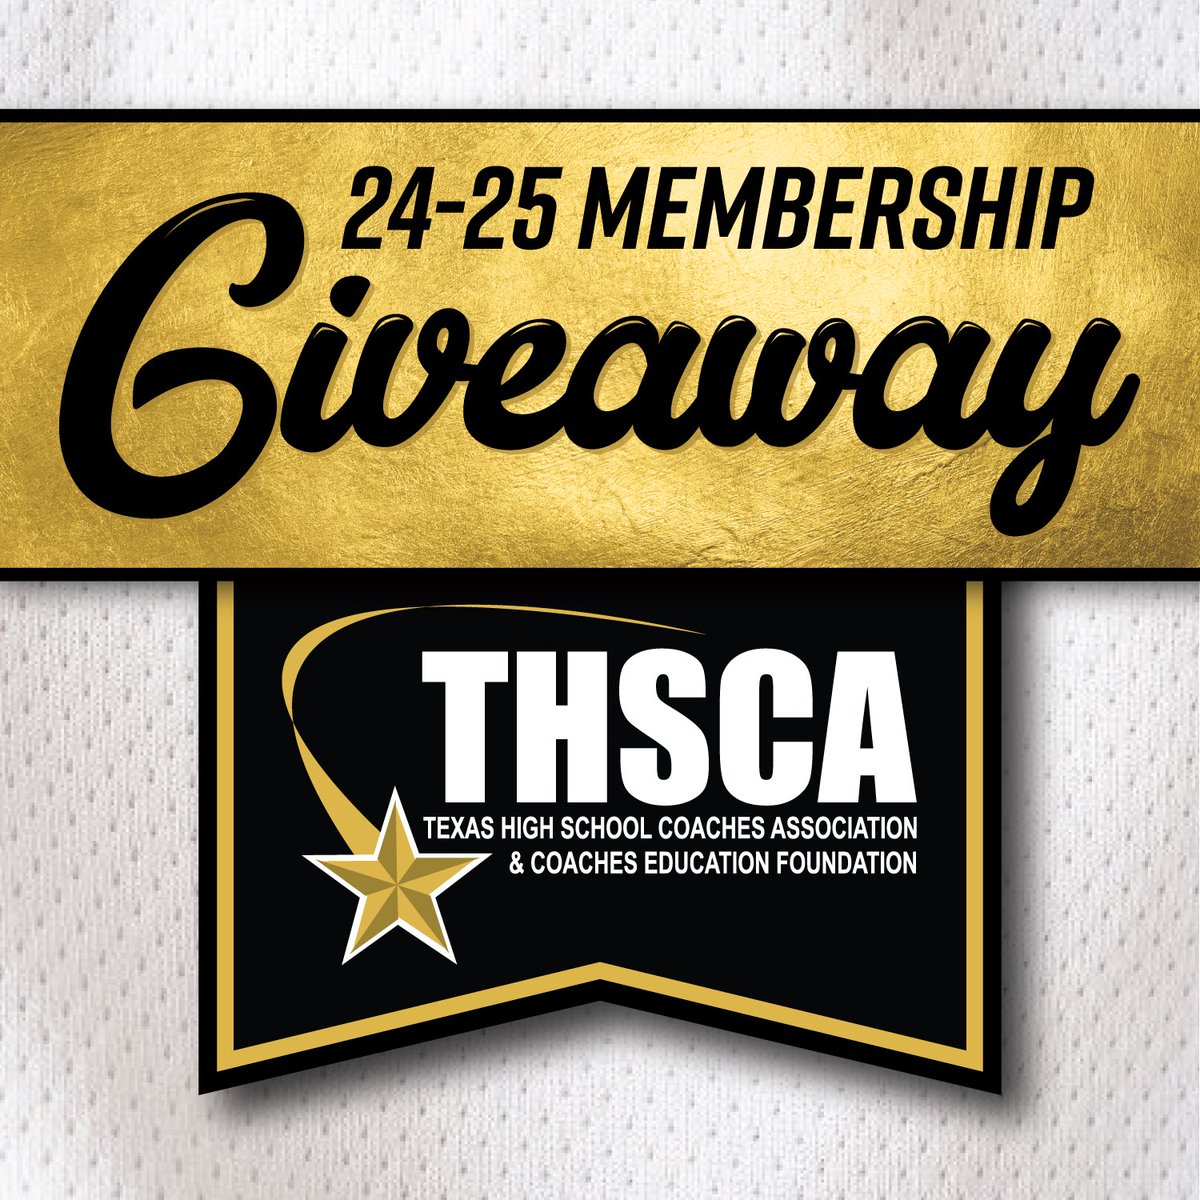 🚨🚨TEXAS COACHES 🚨🚨

I am partnering with @THSCAcoaches for a new membership giveaway! I need your help by tagging coaches that are new to the profession below. If you’ve never been a member or have any questions please don’t hesitate to reach out to me! #THSCABrandAmbassador